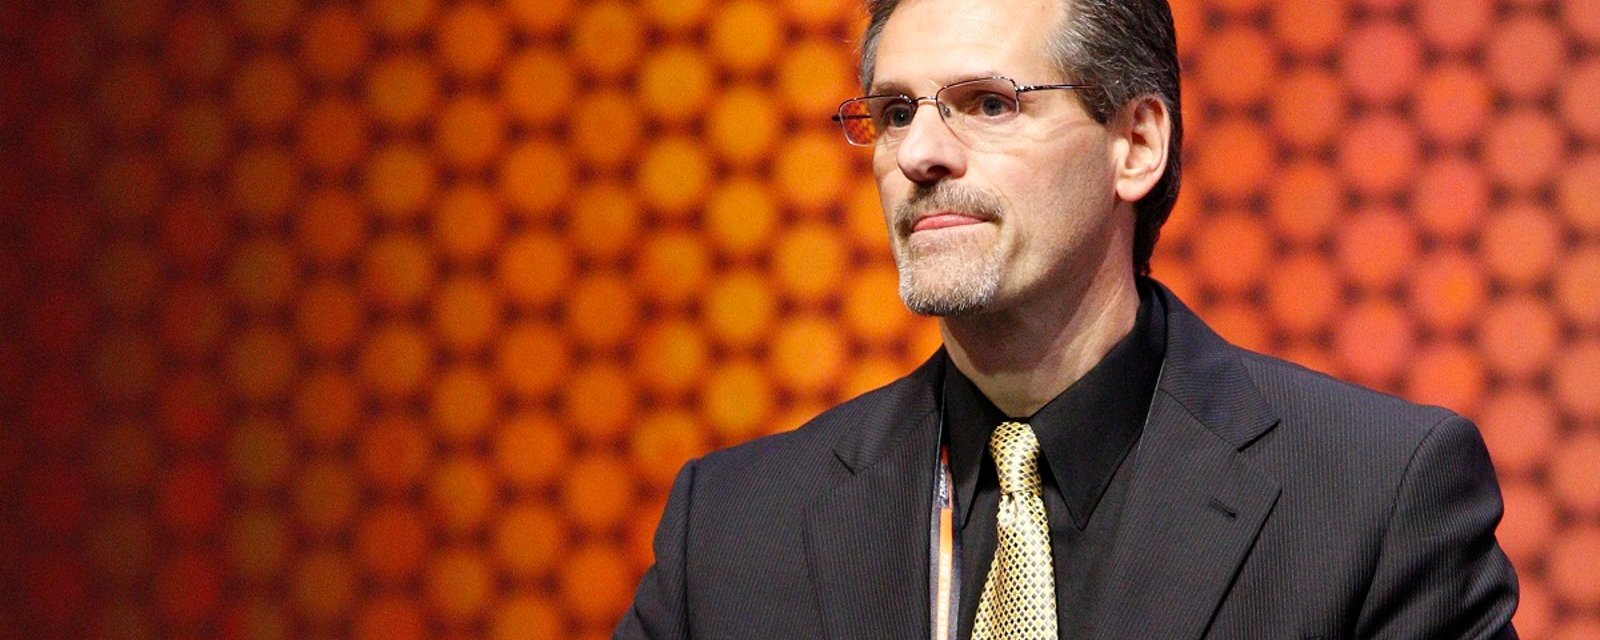 Rumor: Hextall hints at the reason he was fired by the Flyers.